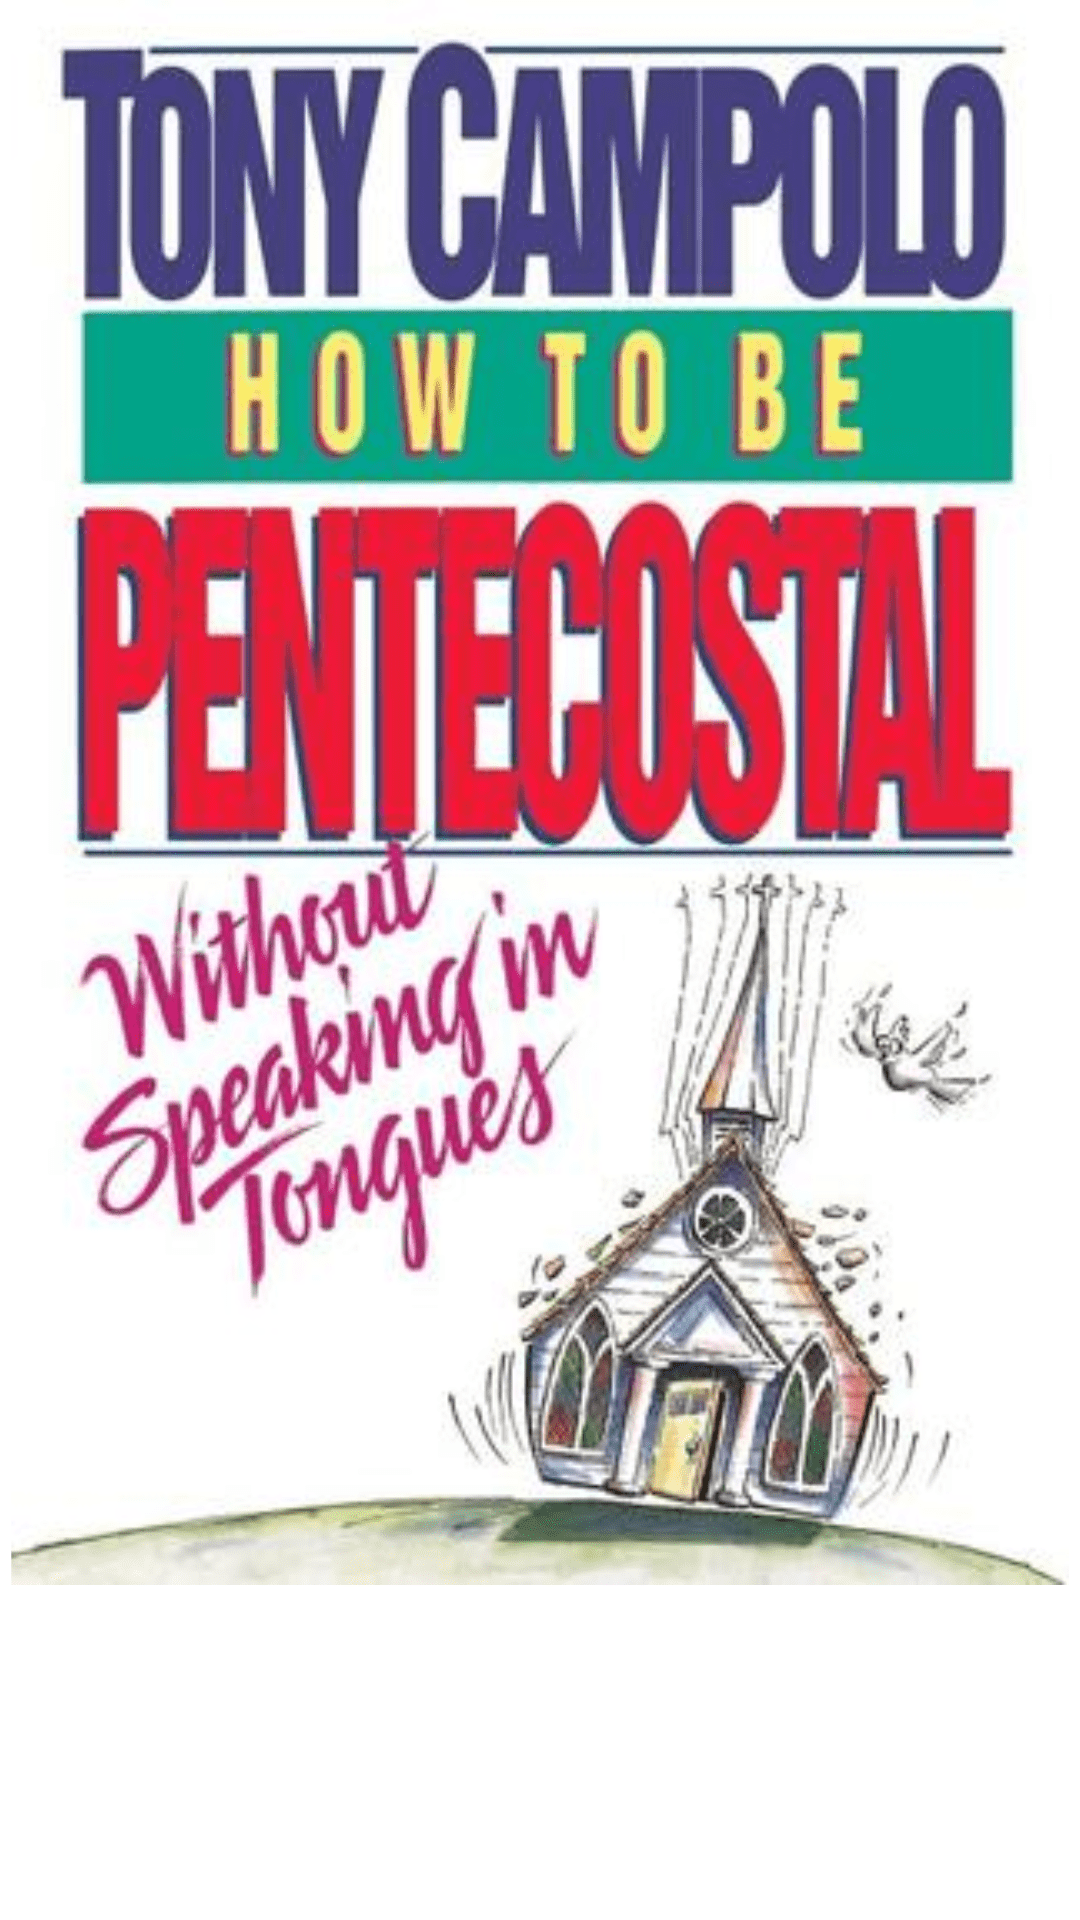 How to be Pentecostal Without Speaking in Tongues